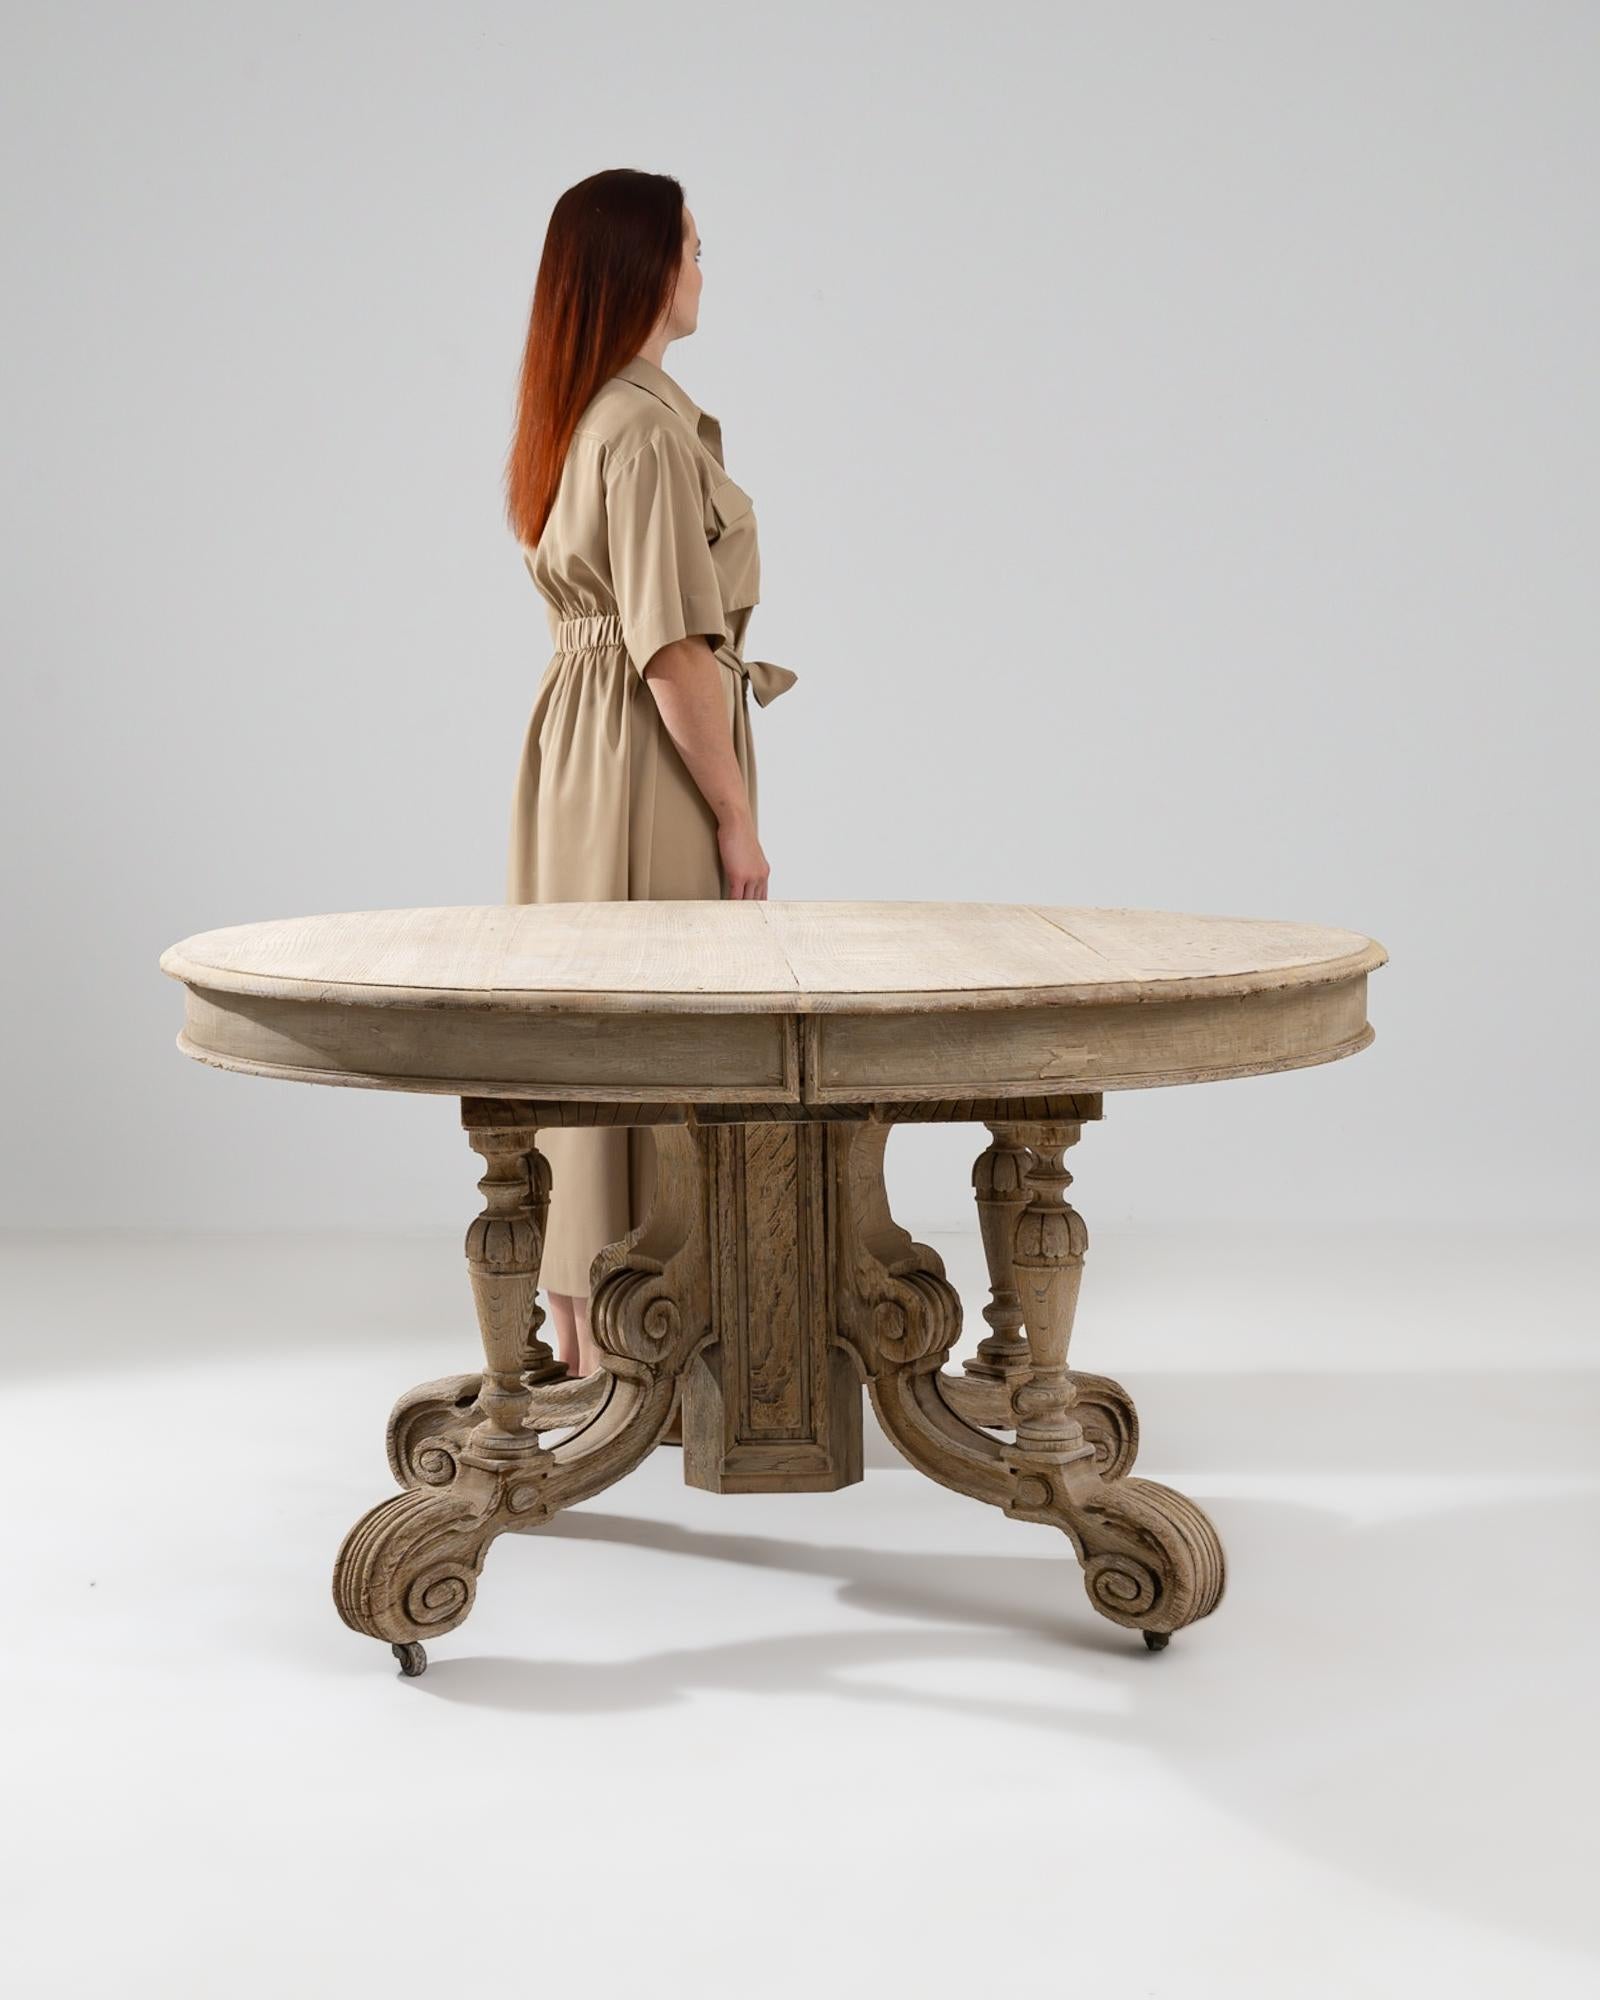 French Provincial Turn of the Century French Oak Table on Wheels